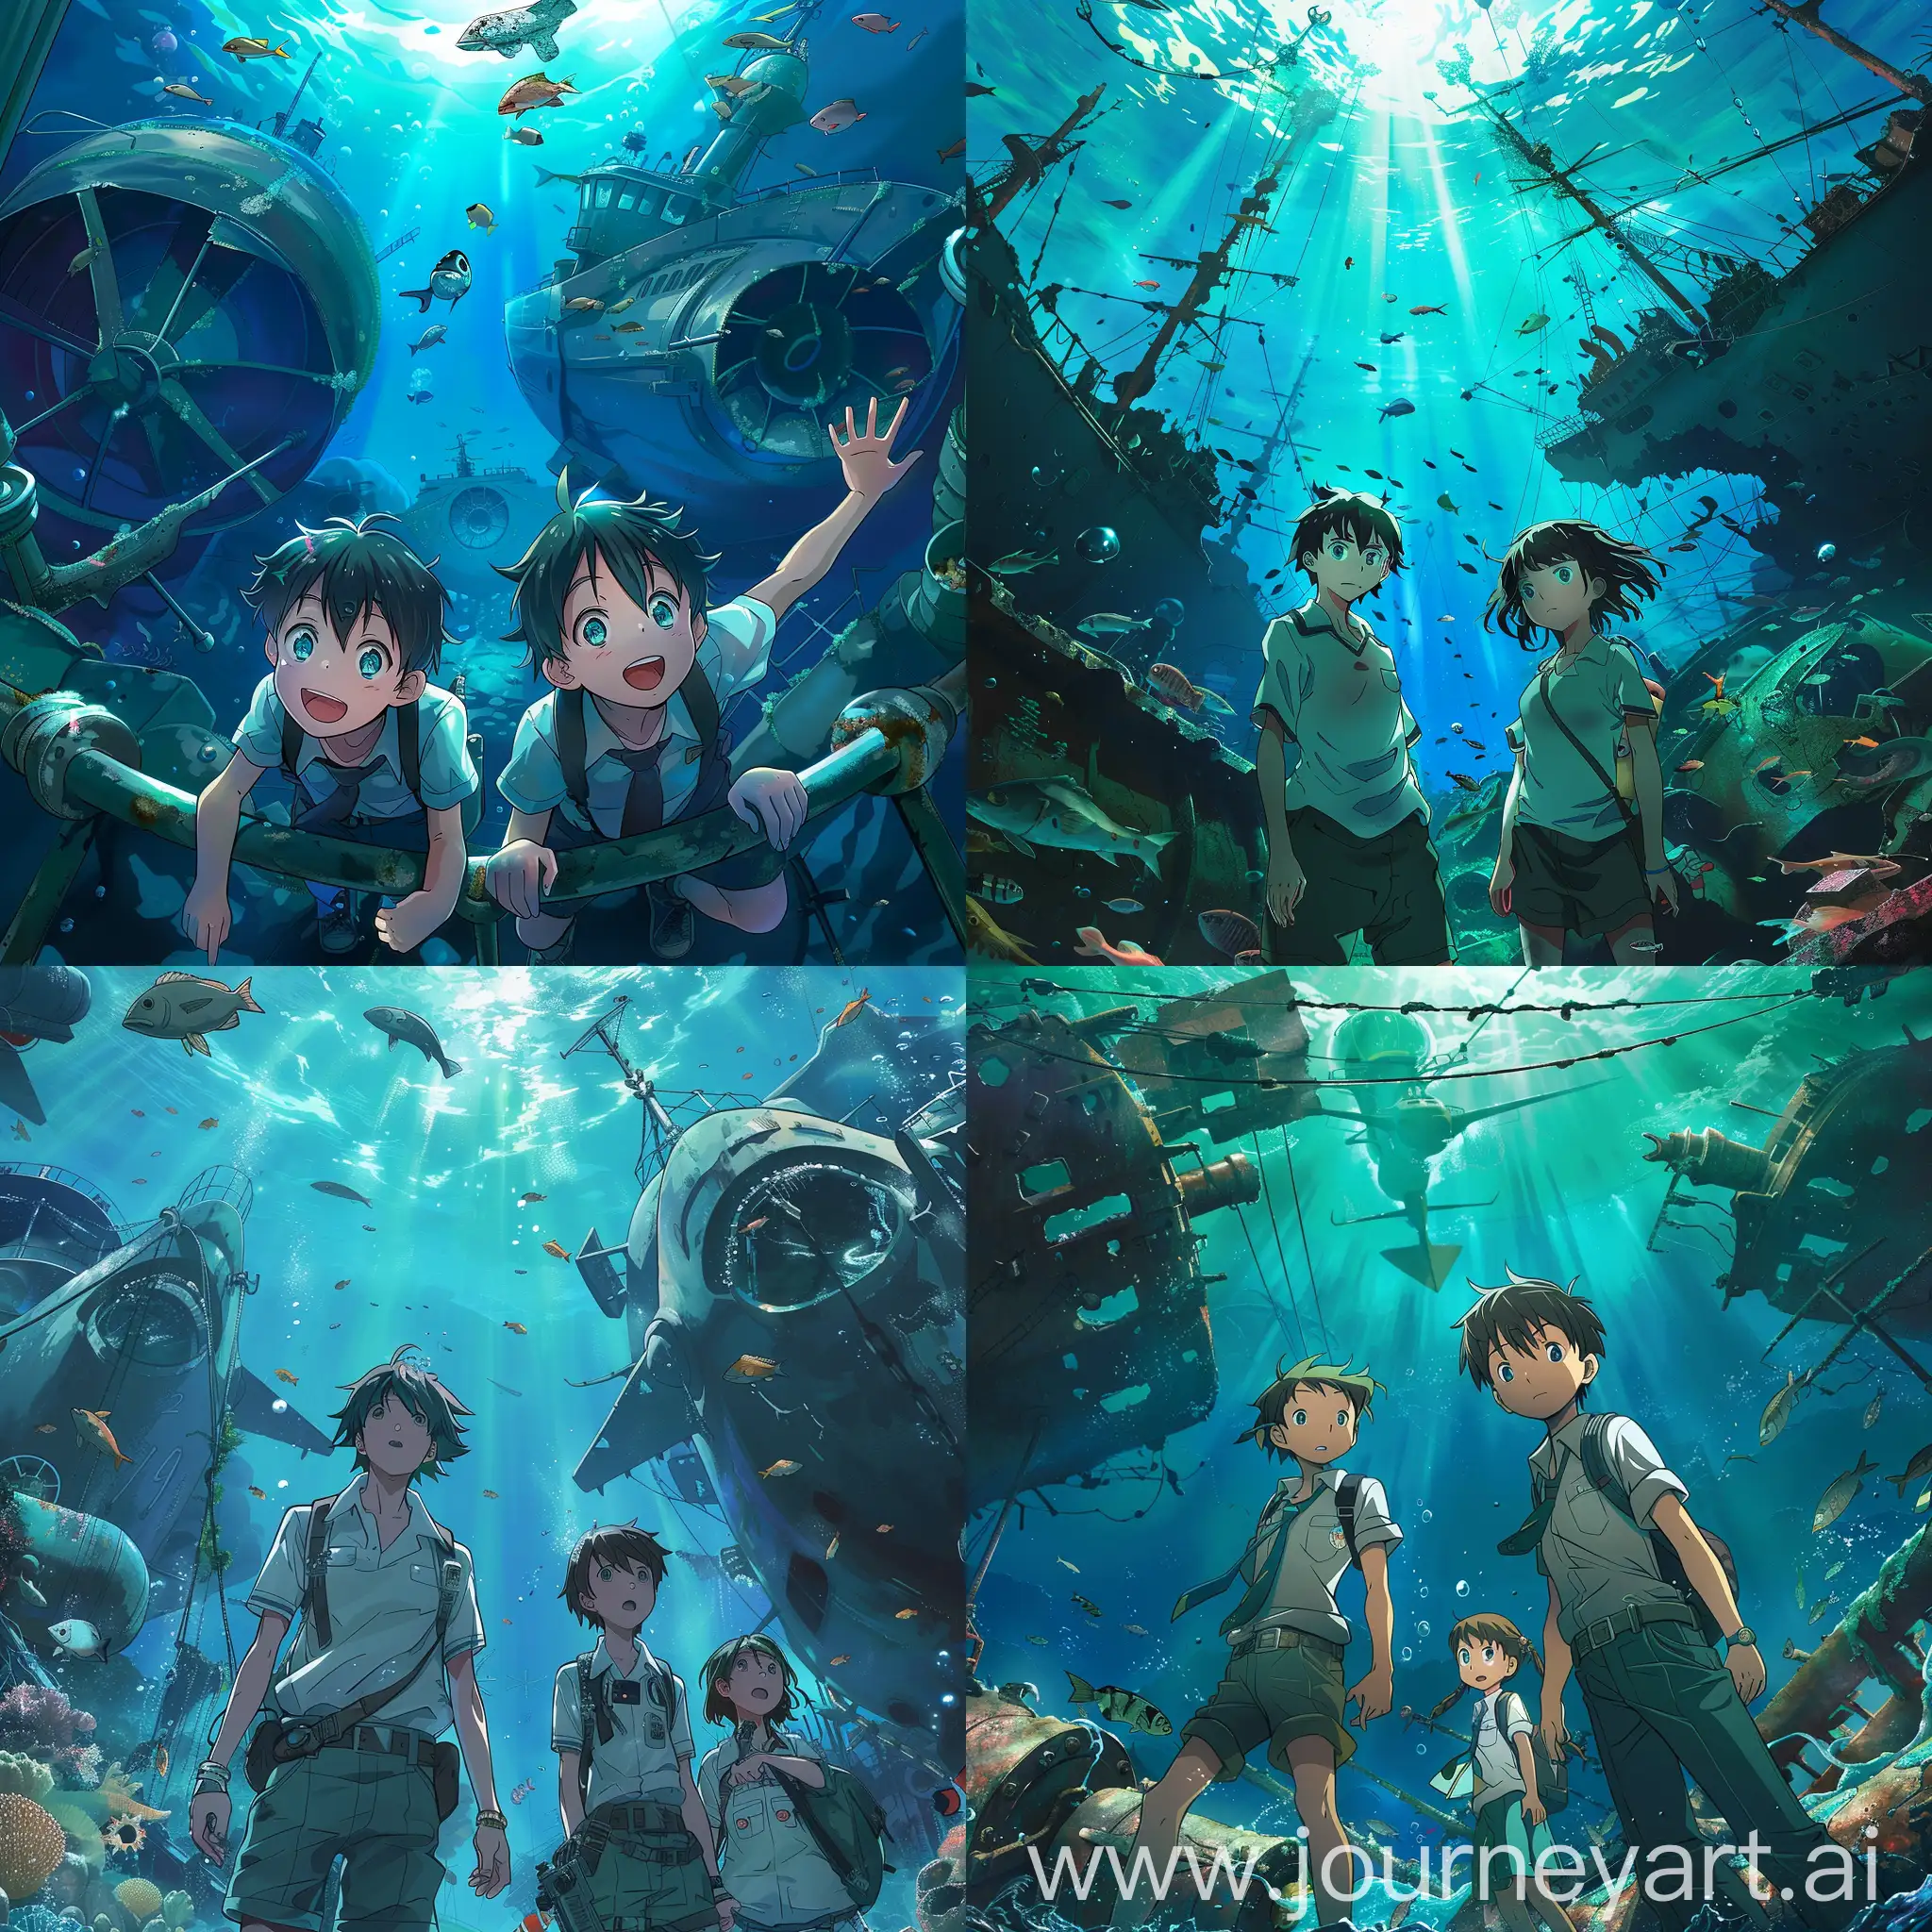 two boys and a girl, 13 years age, underwater, in deep sea exploration suite, so many ship wrecks, strange fishes, ship wrecks, anime style